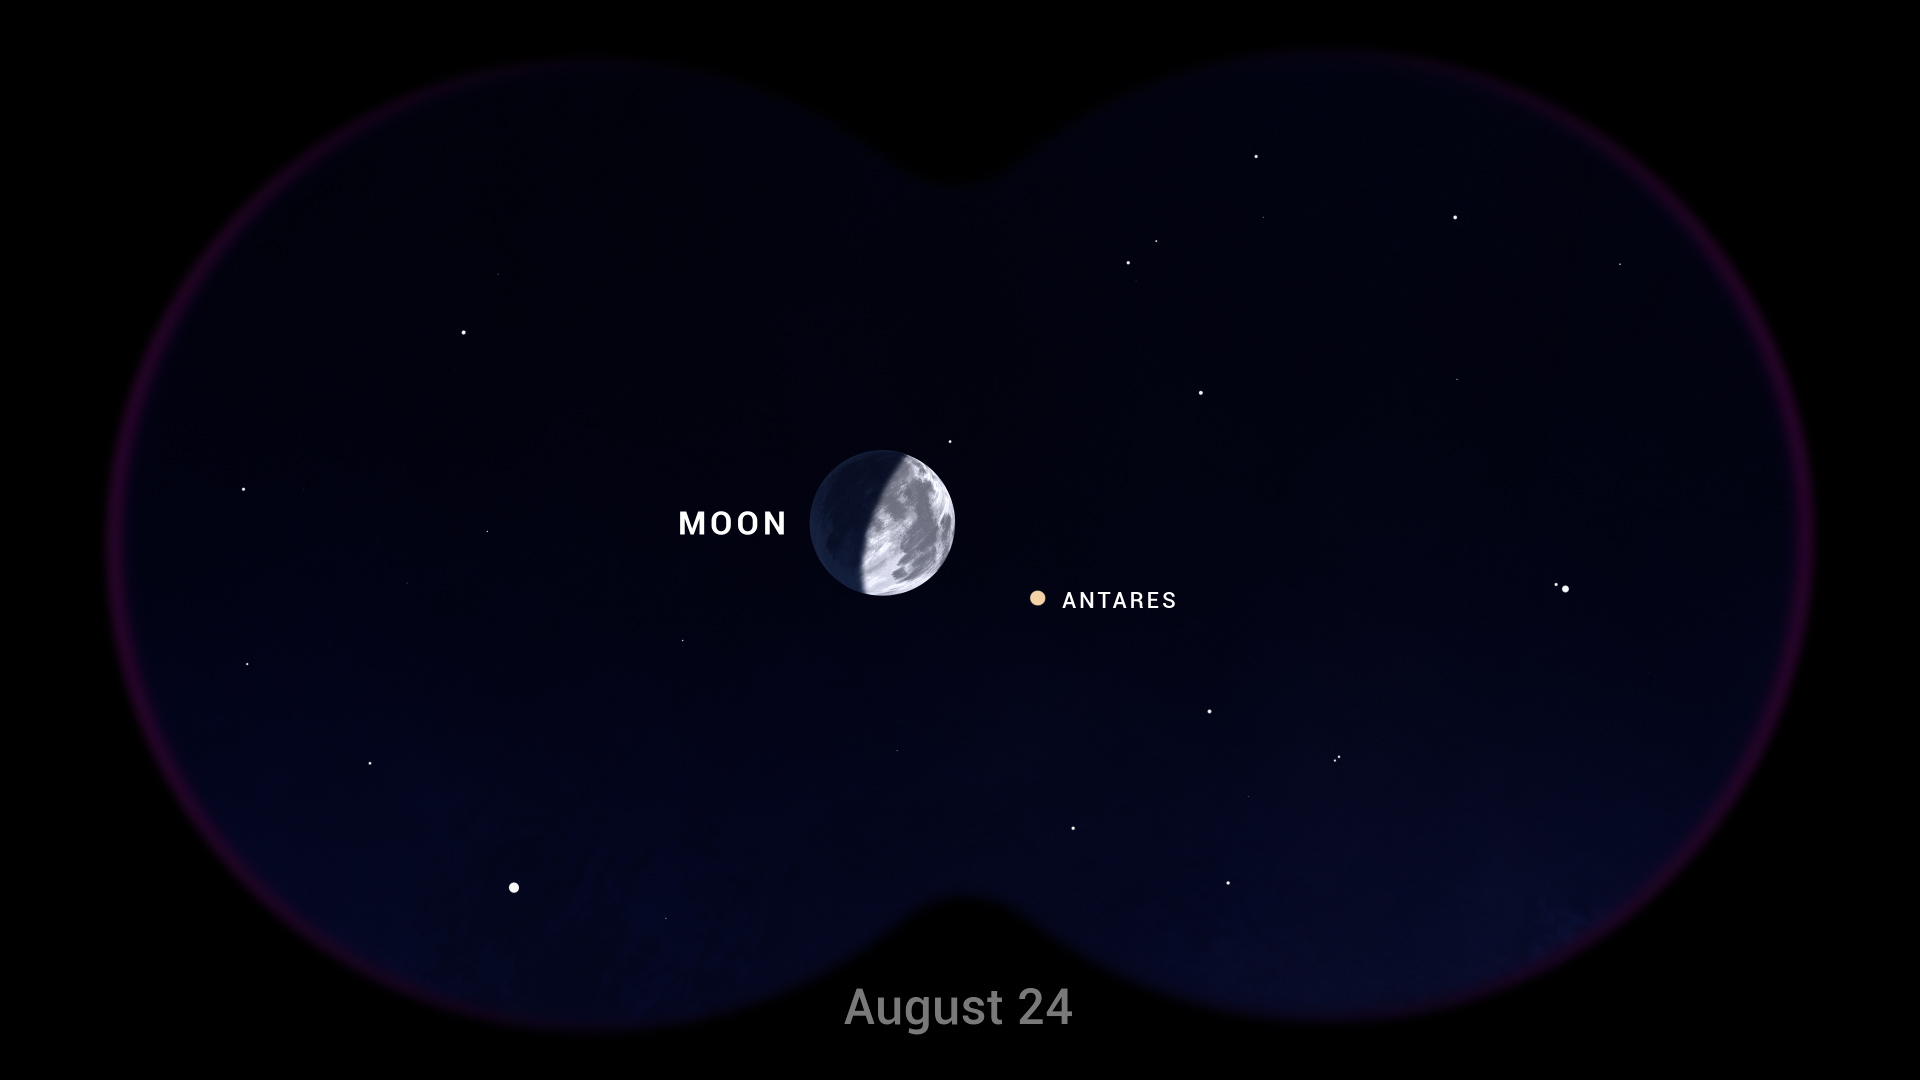 An illustrated sky chart shows a binocular view of the evening sky on August 24. The Moon is left of center, appearing a bit more than half full.Immediately to its right, the star Antares is depicted as a bright, reddish dot.